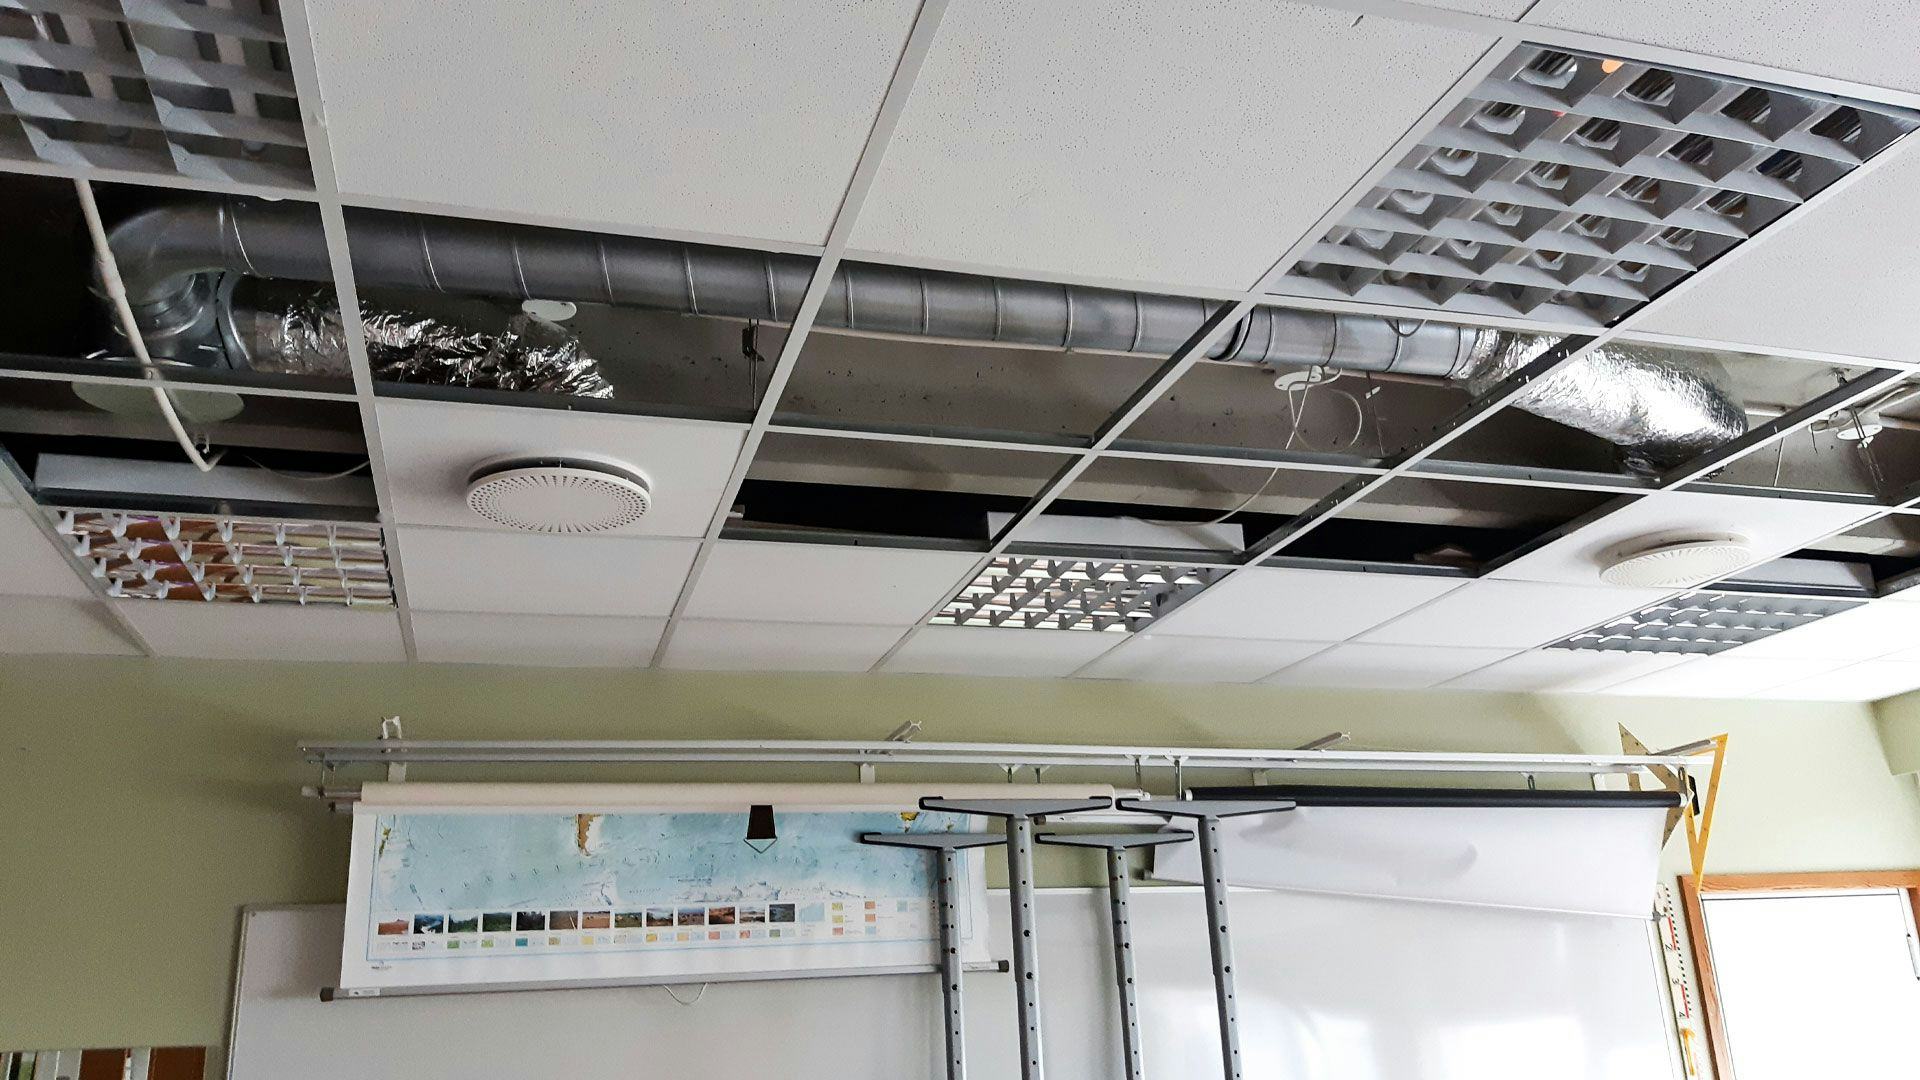 A room with a partially exposed ceiling revealing ductwork